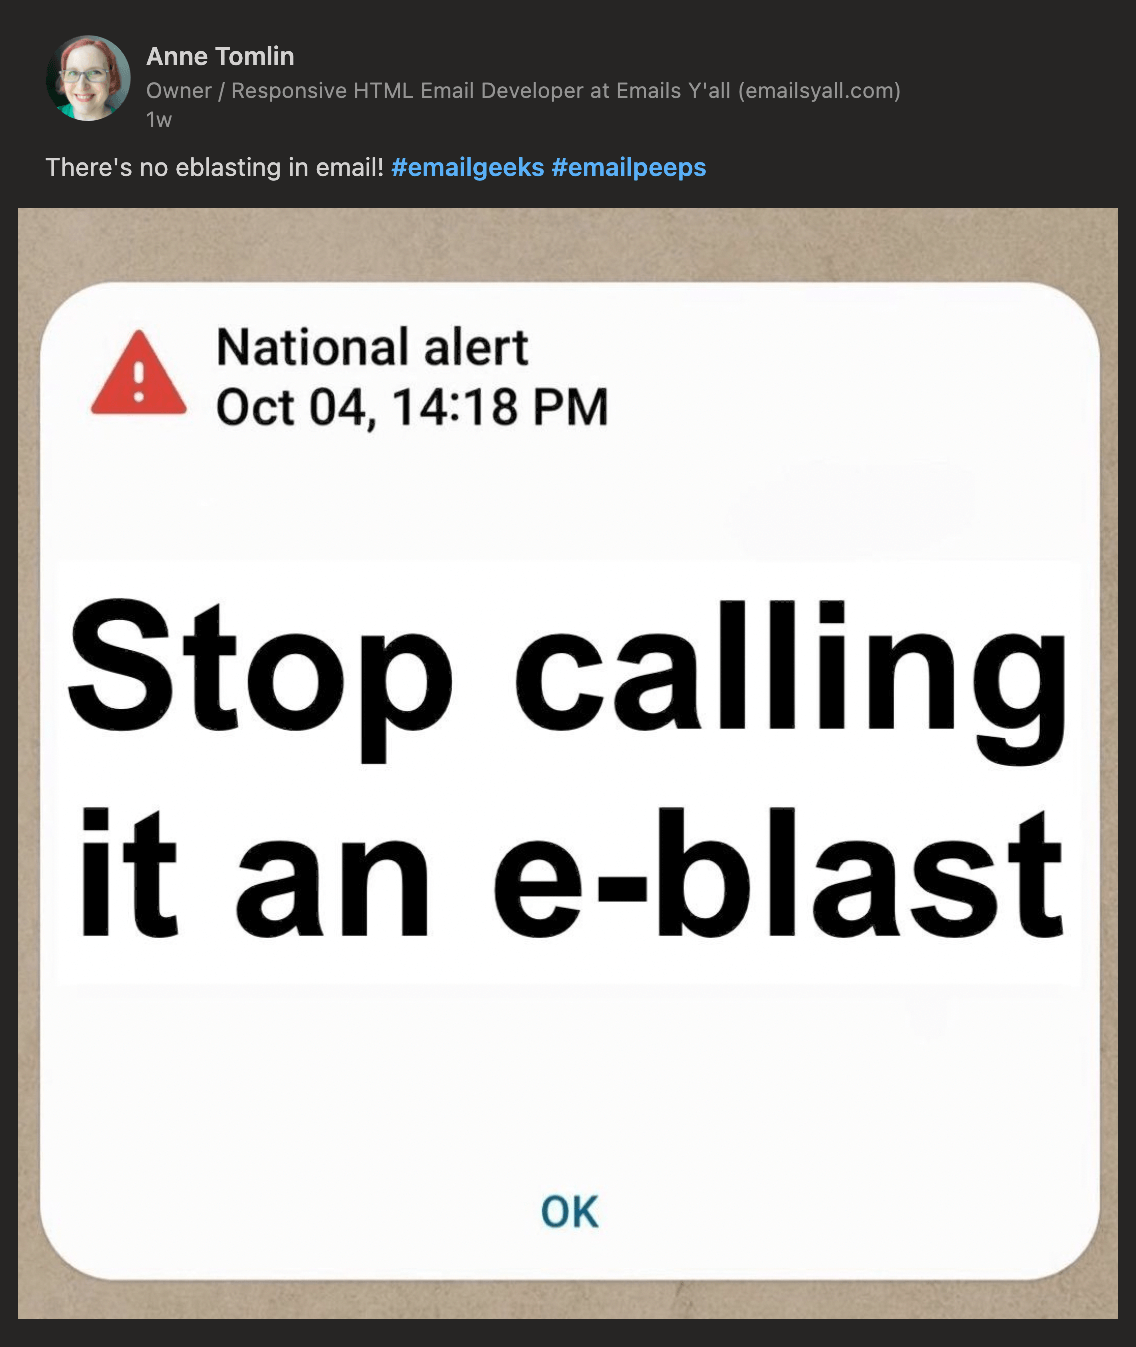 Anne Tomlin on LinkedIn says 'There's no eblasting in email! #emailgeeks #emailpeeps' and the image is the national alert that went out on October 4, 2023 at 14:18 PM with the words 'Stop calling it an e-blast'